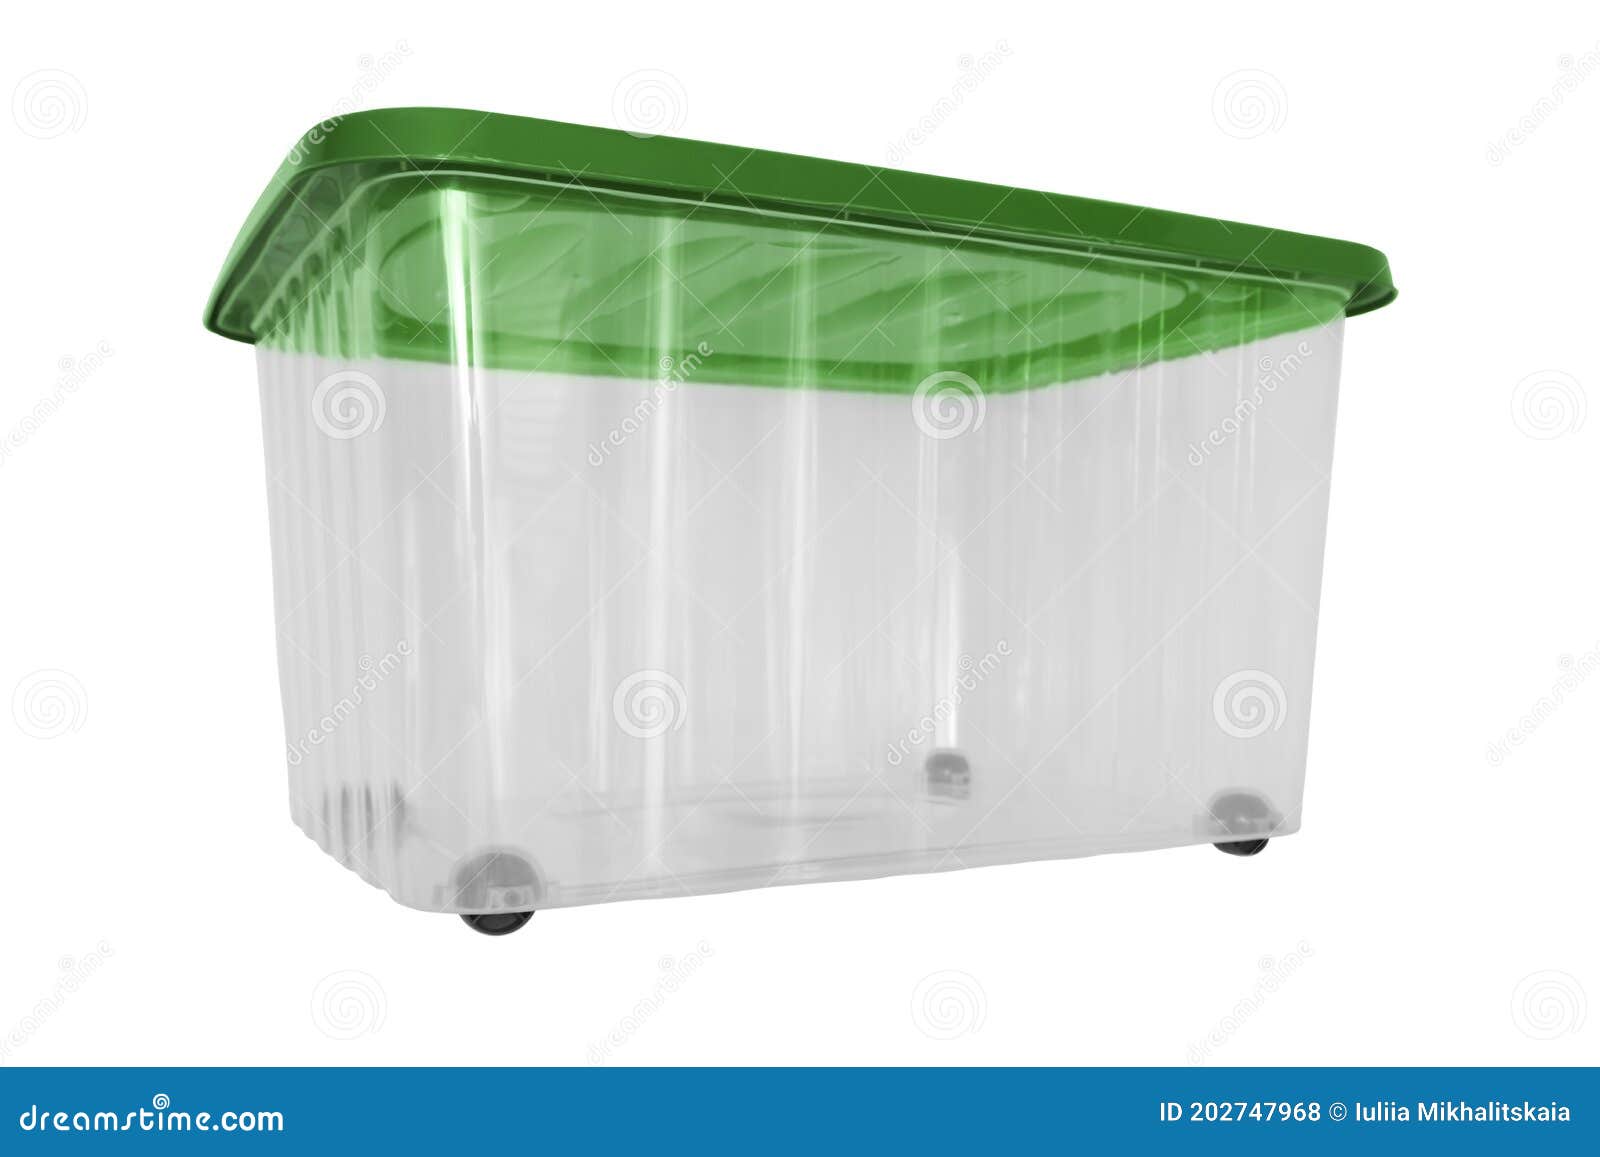 https://thumbs.dreamstime.com/z/transparent-big-plastic-portable-container-storage-box-wheels-green-cover-general-purpose-household-equipment-202747968.jpg